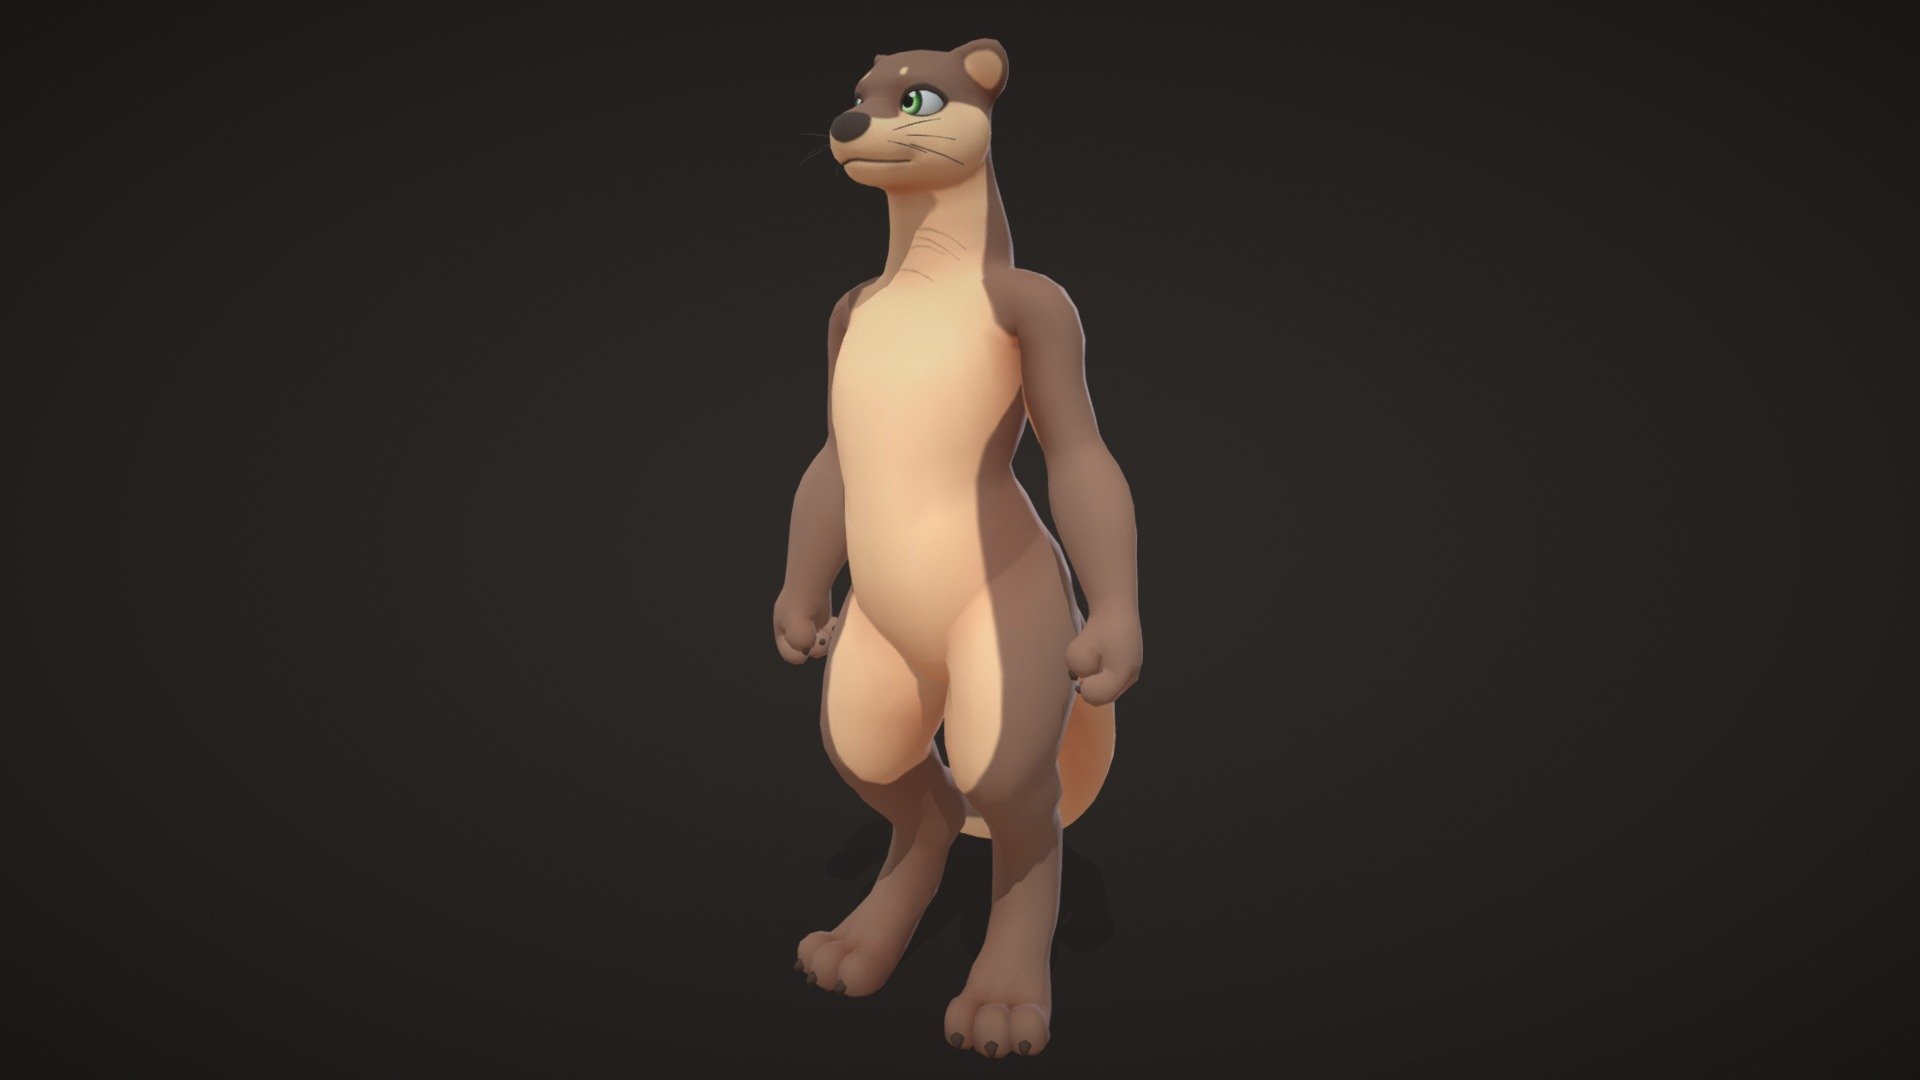 IF YOU WANT THE AVATAR PLEASE DON'T BUY FROM SKETCHFAB, SKETCHFAB SUCKS! AND DOES NOT LET ME LINK MY GUMROAD!!!

Preconfigured VRC avatar available at my Ko-Fi shop! Check it here &gt; https://ko-fi.com/s/047ebe3e47

Rigged for VRChat, Complete with visemes! And as always, Feel free to use this in any way you fell like, Just remember to credit me :)

*Update to the terms of use: You cannot use any part of my work in an NFT or any other form of Crypto related media.

Also, A Ko-Fi tip would be a nice little way to support me If you're feeling generous &gt; https://ko-fi.com/skye0811 - Talio, Otter - Buy Royalty Free 3D model by SKYE (@GalileoGB) 3d model